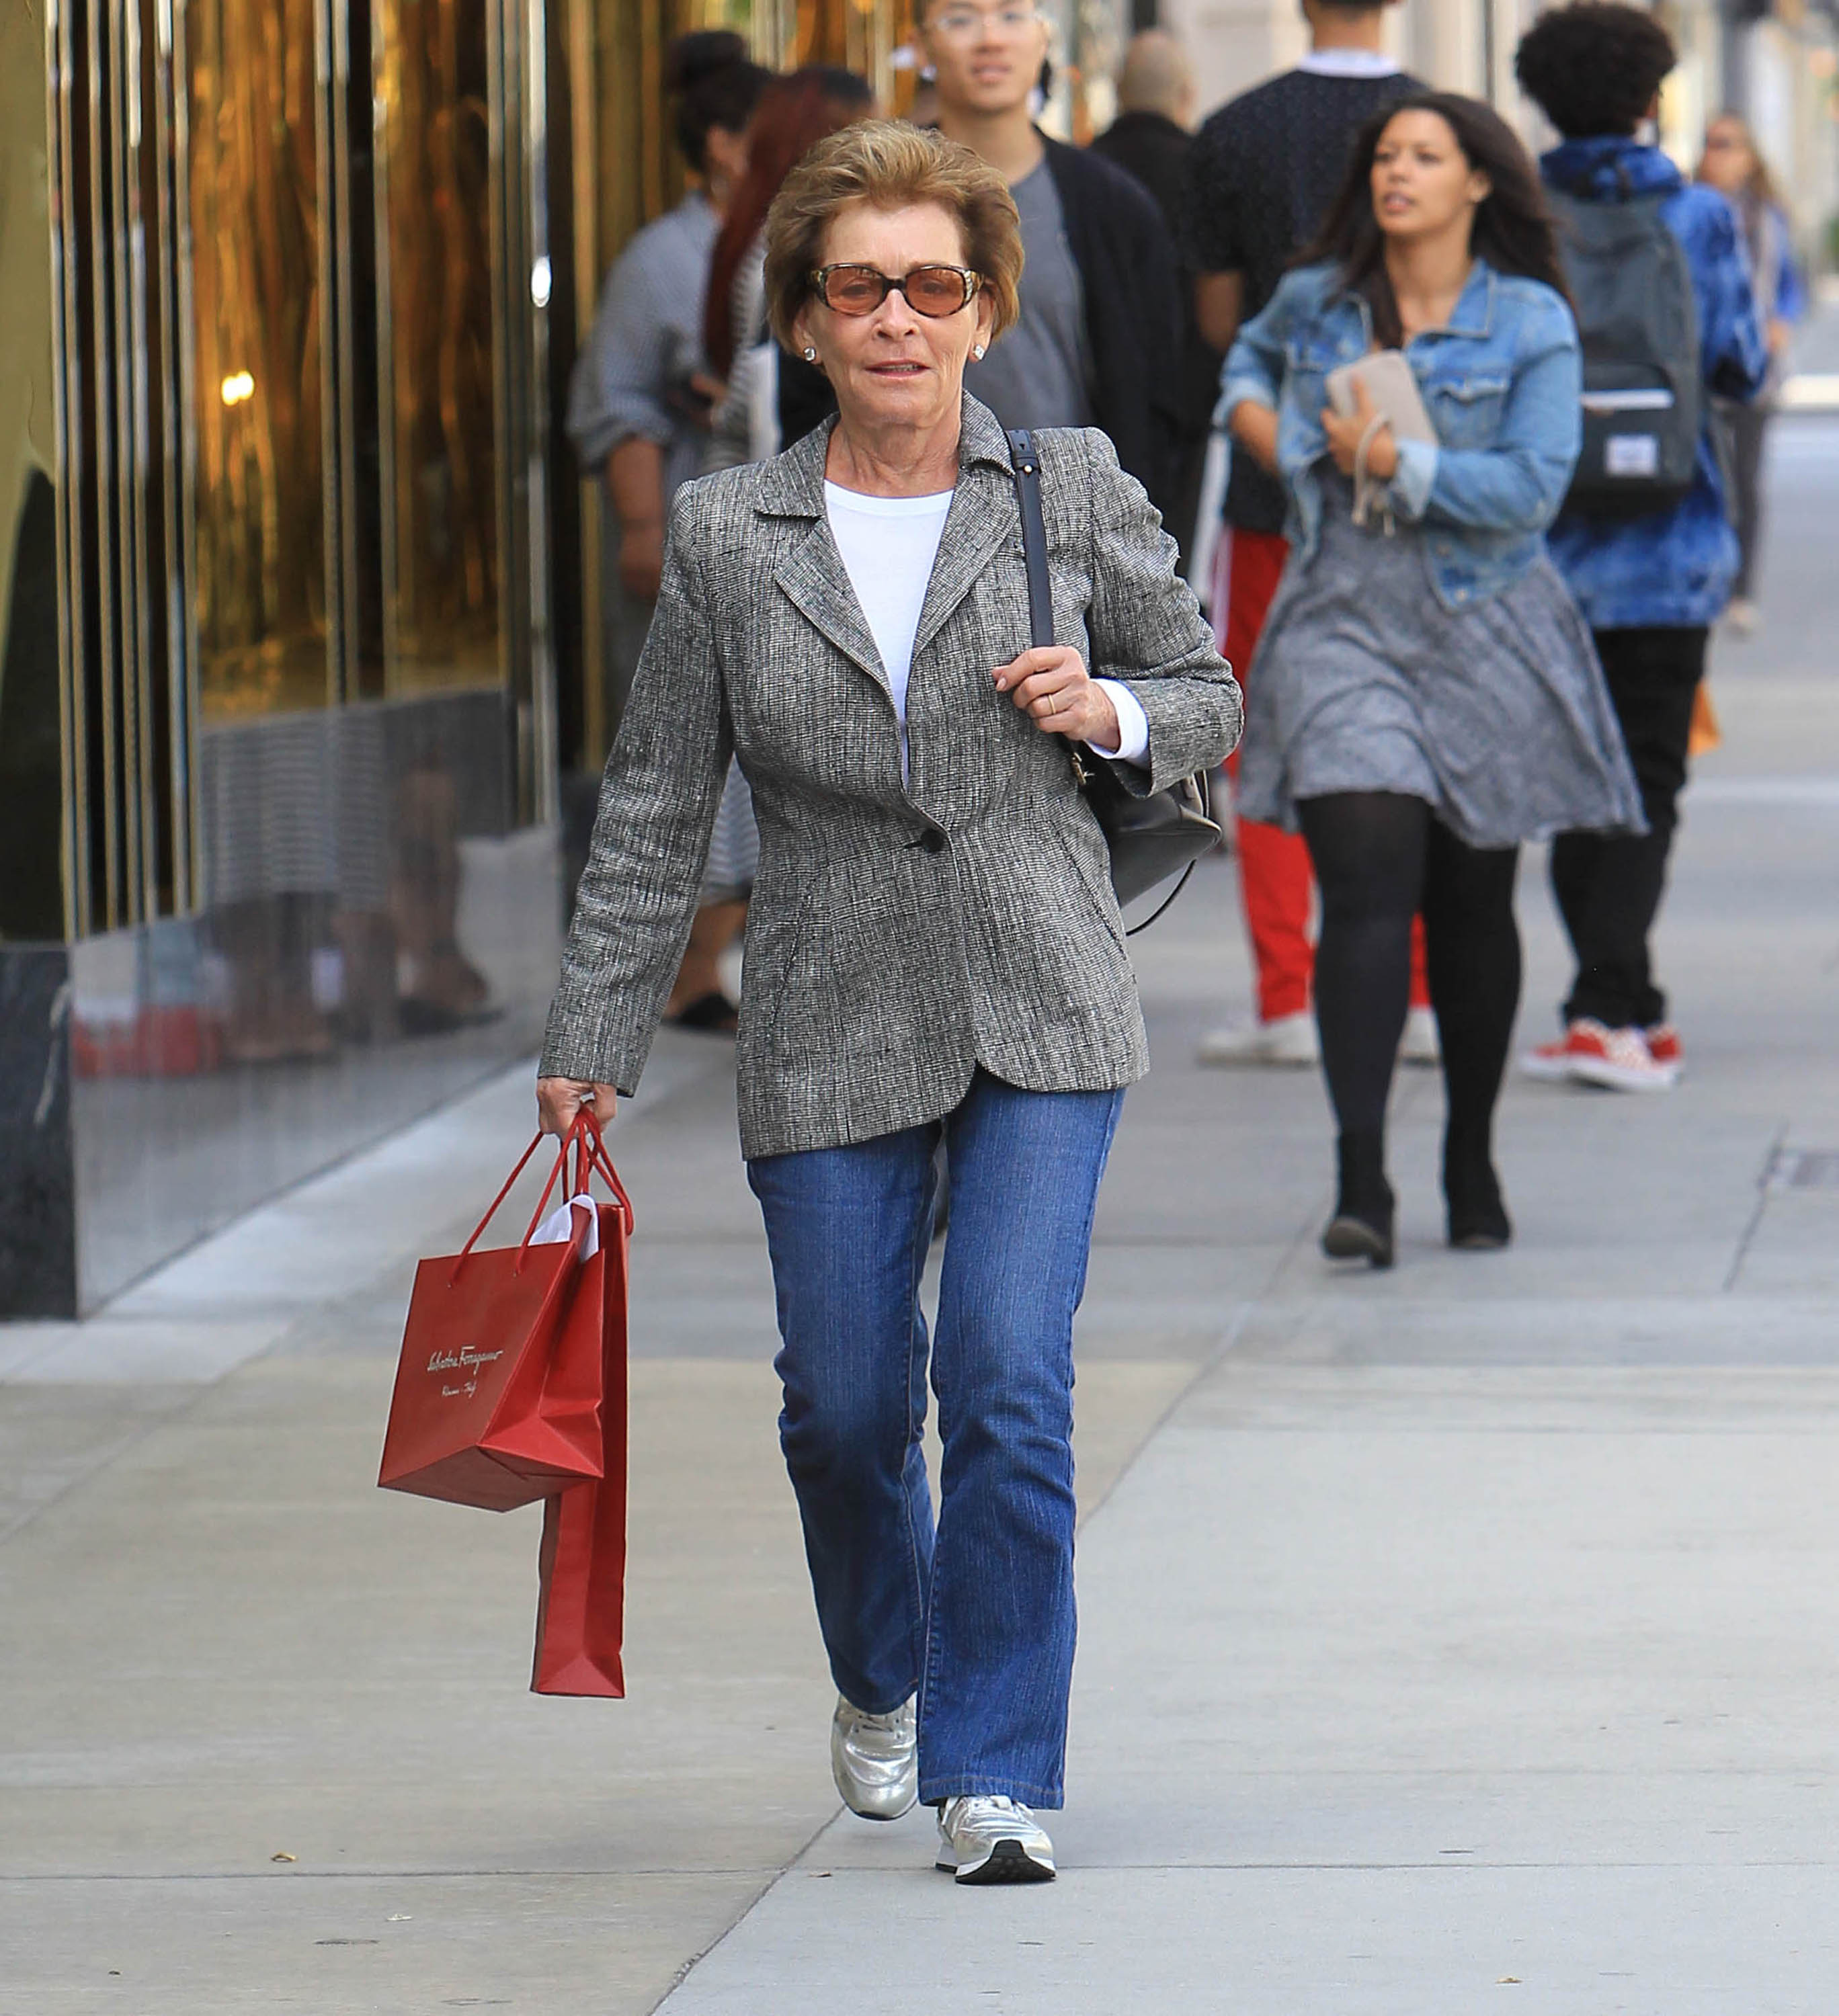 Judge Judy walking in Los Angeles in 2018 | Source: Getty Images